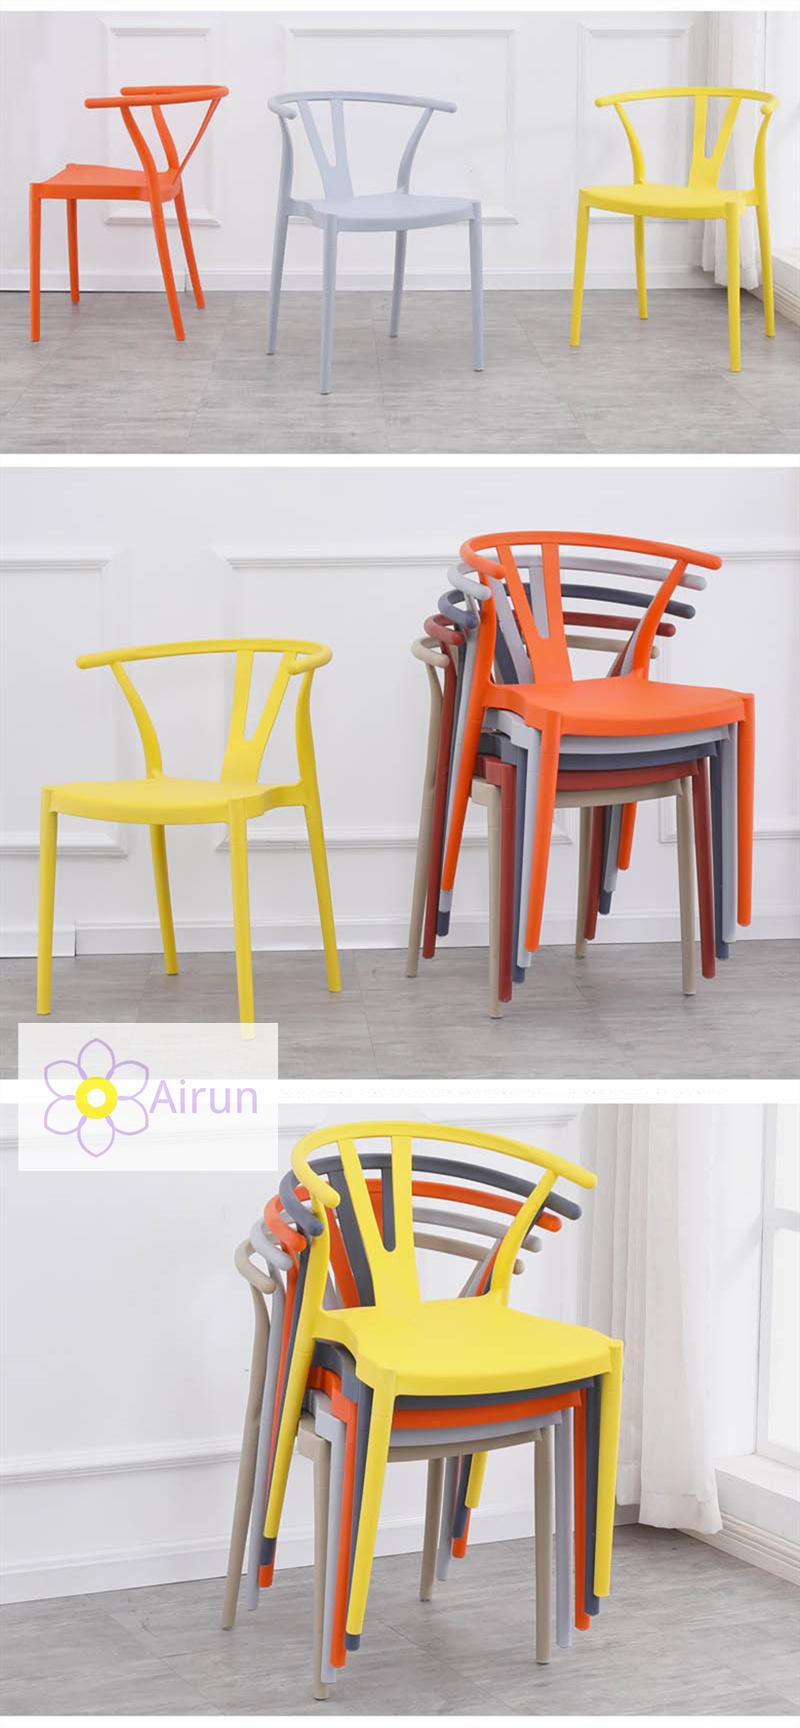 2021 Hot Sale China Wholesale New Design Plastic Chair Stackable Dining Chair